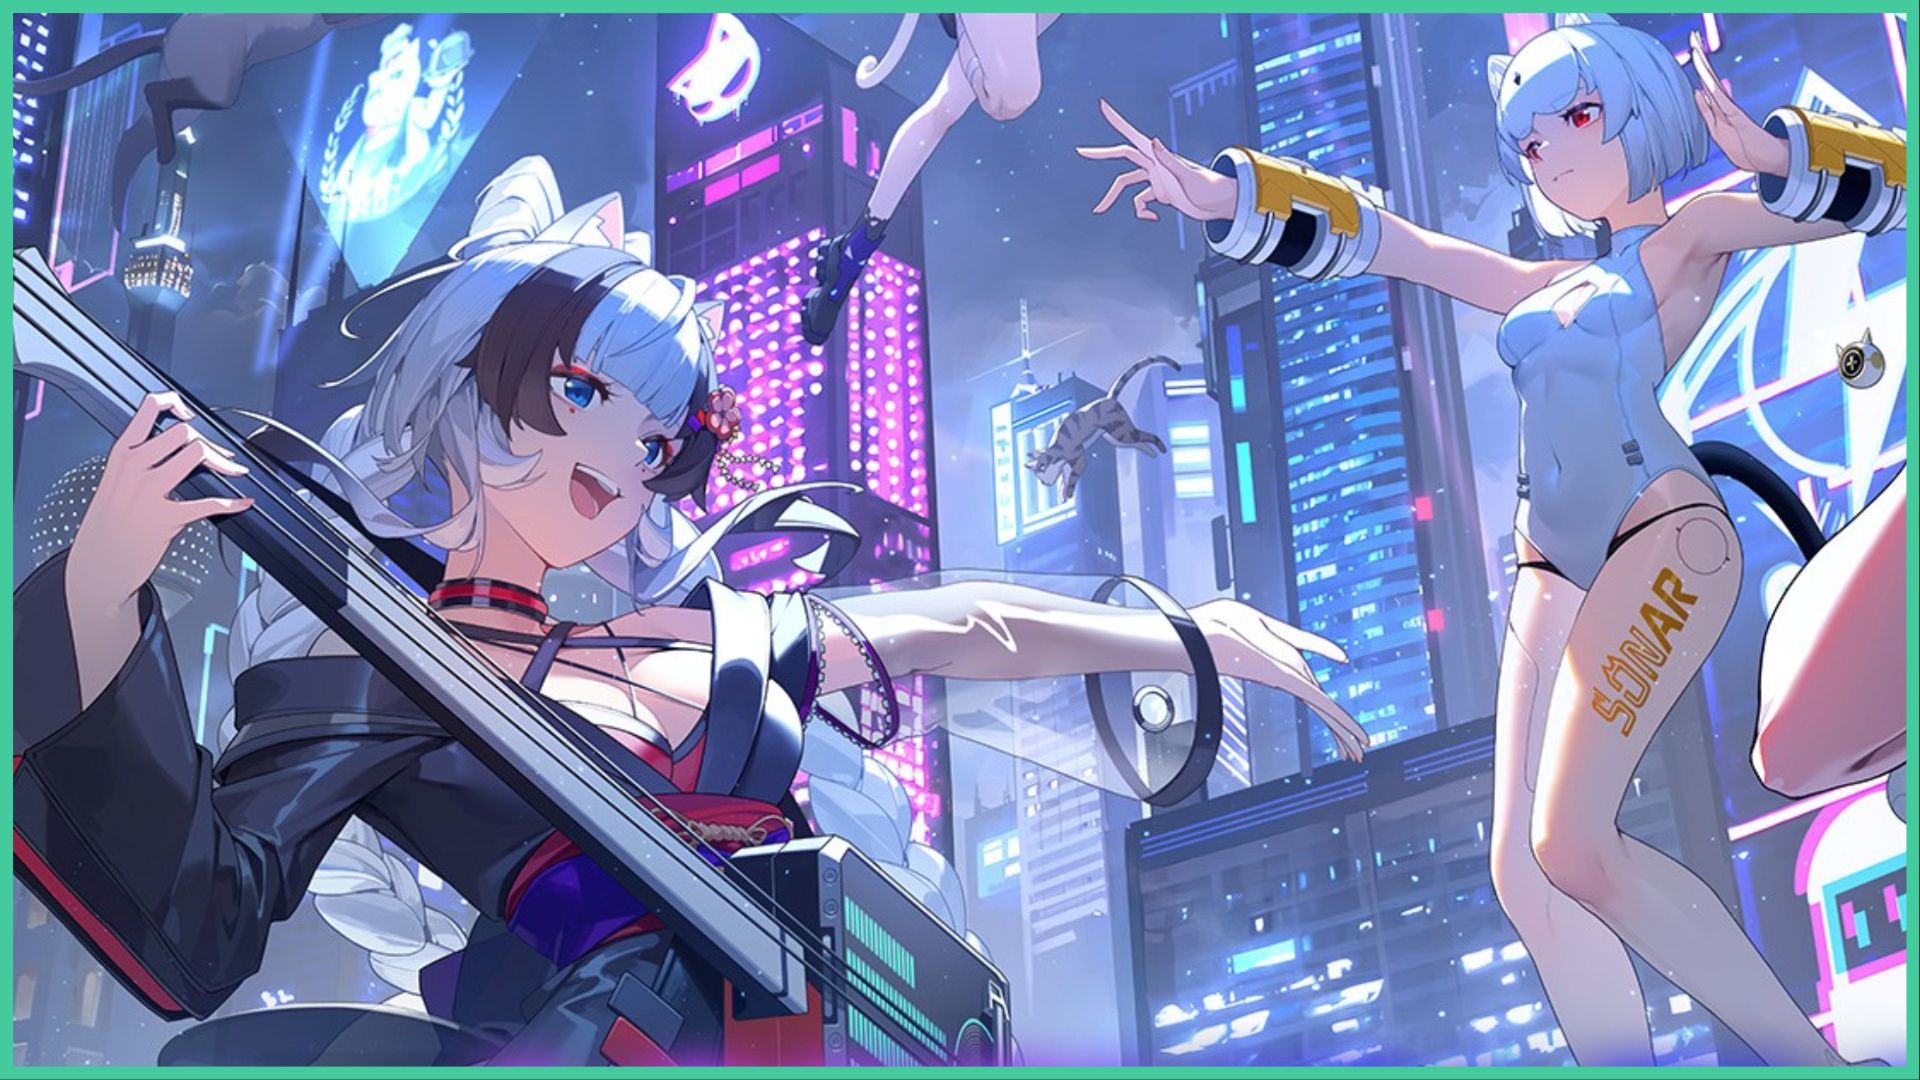 feature image for our cat fantasy tier list, the image features promo art for the game of two cat girls, with one smiling while holding a guitar and the other floating while pointing ahead, there is a neon cityscape in the background with cat themed signs and cats flying in the air